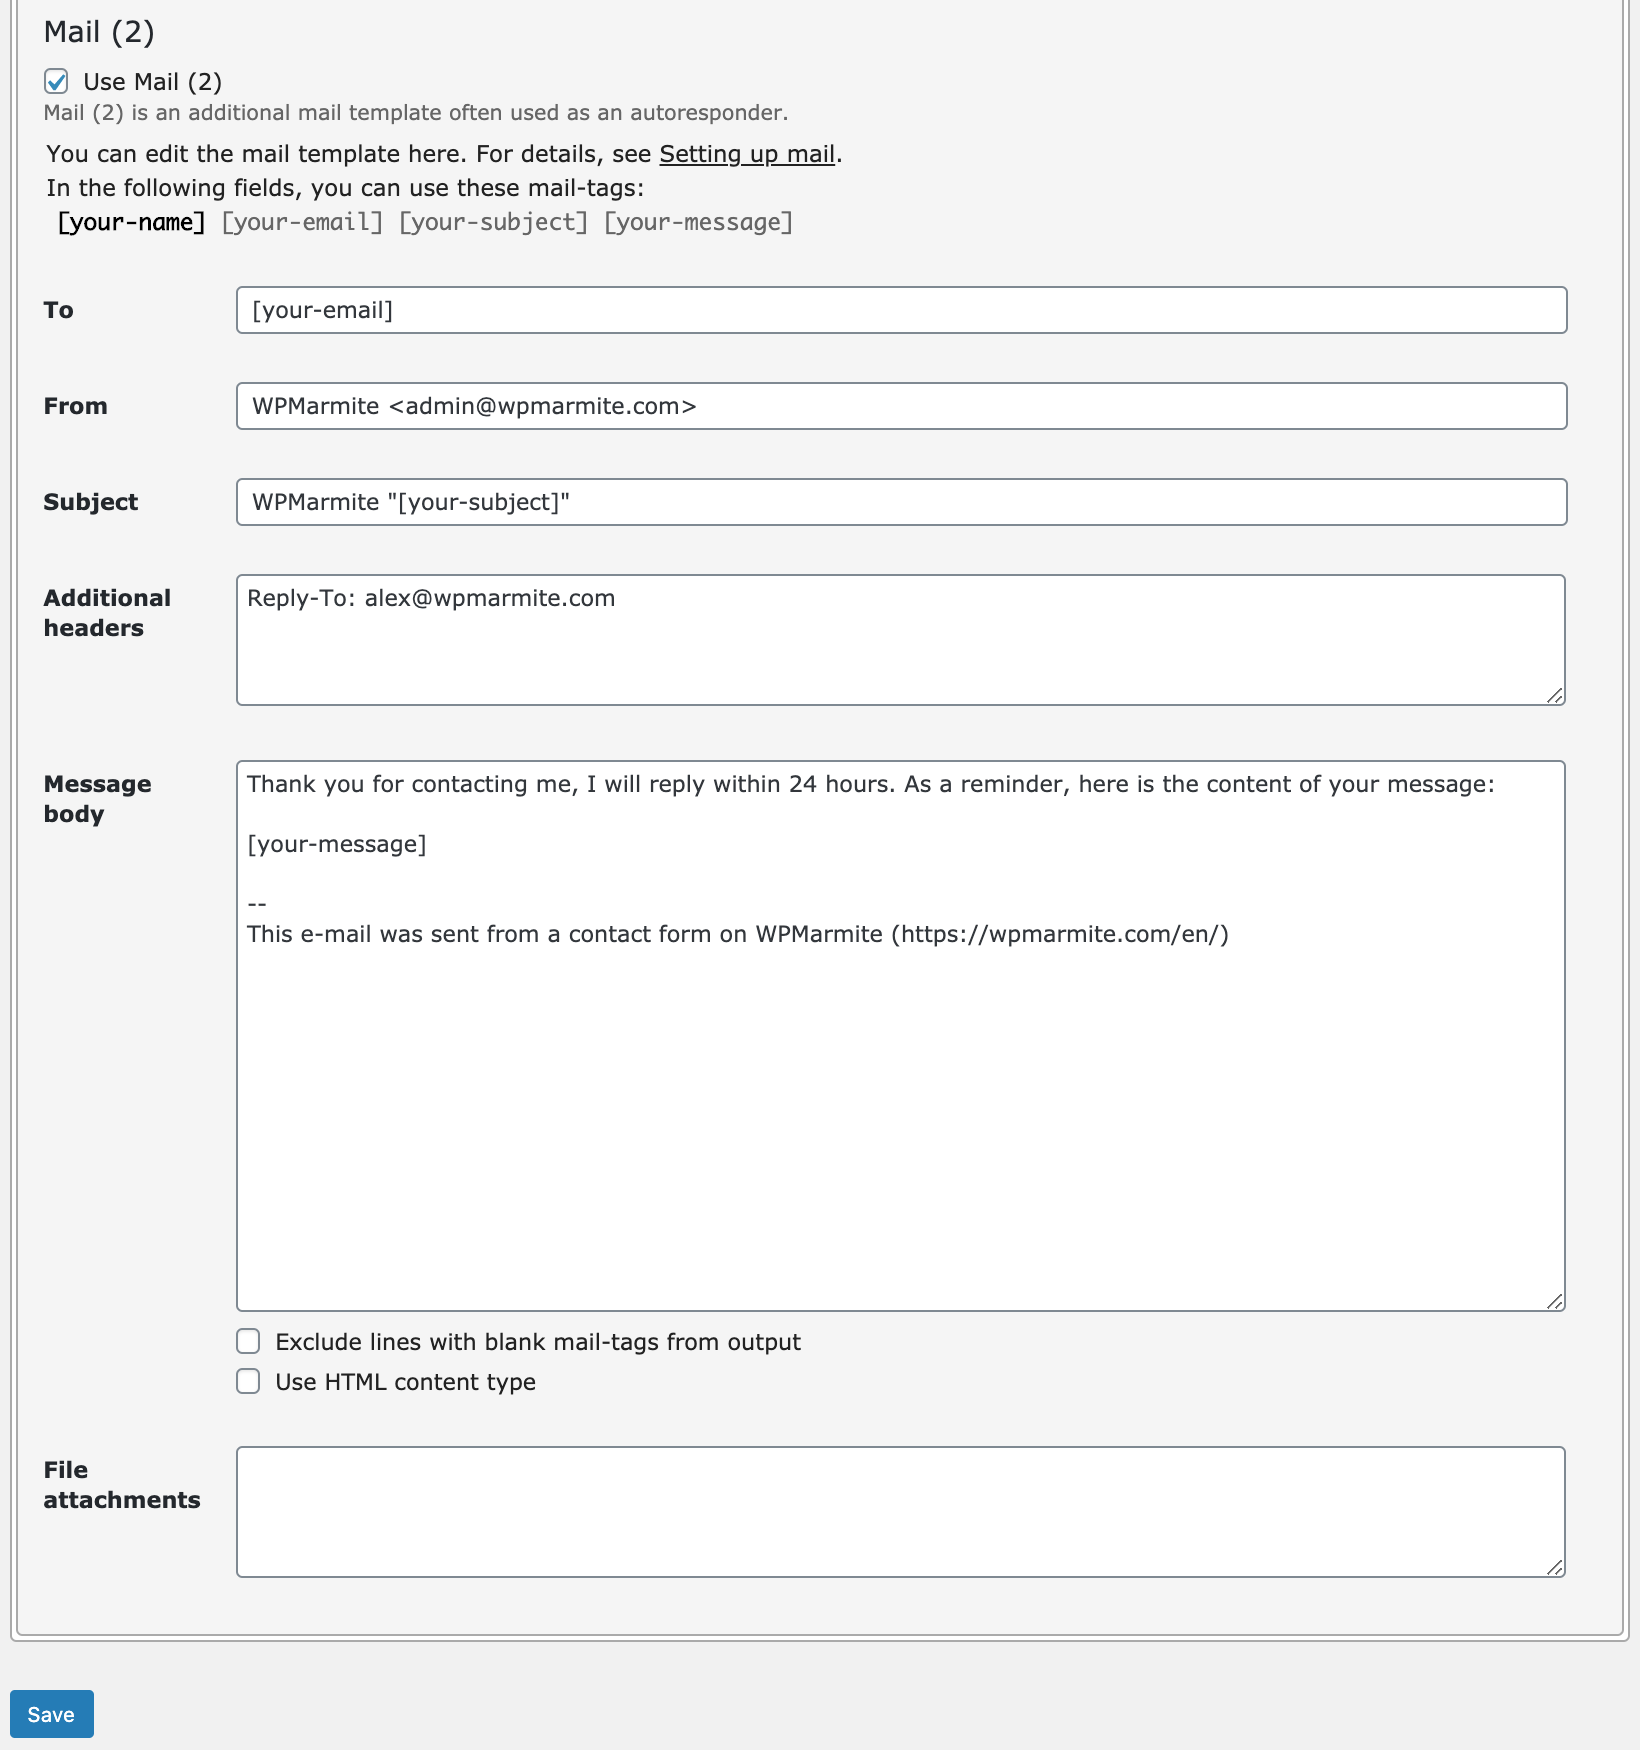 Mail (2) of contact form 7 on WordPress